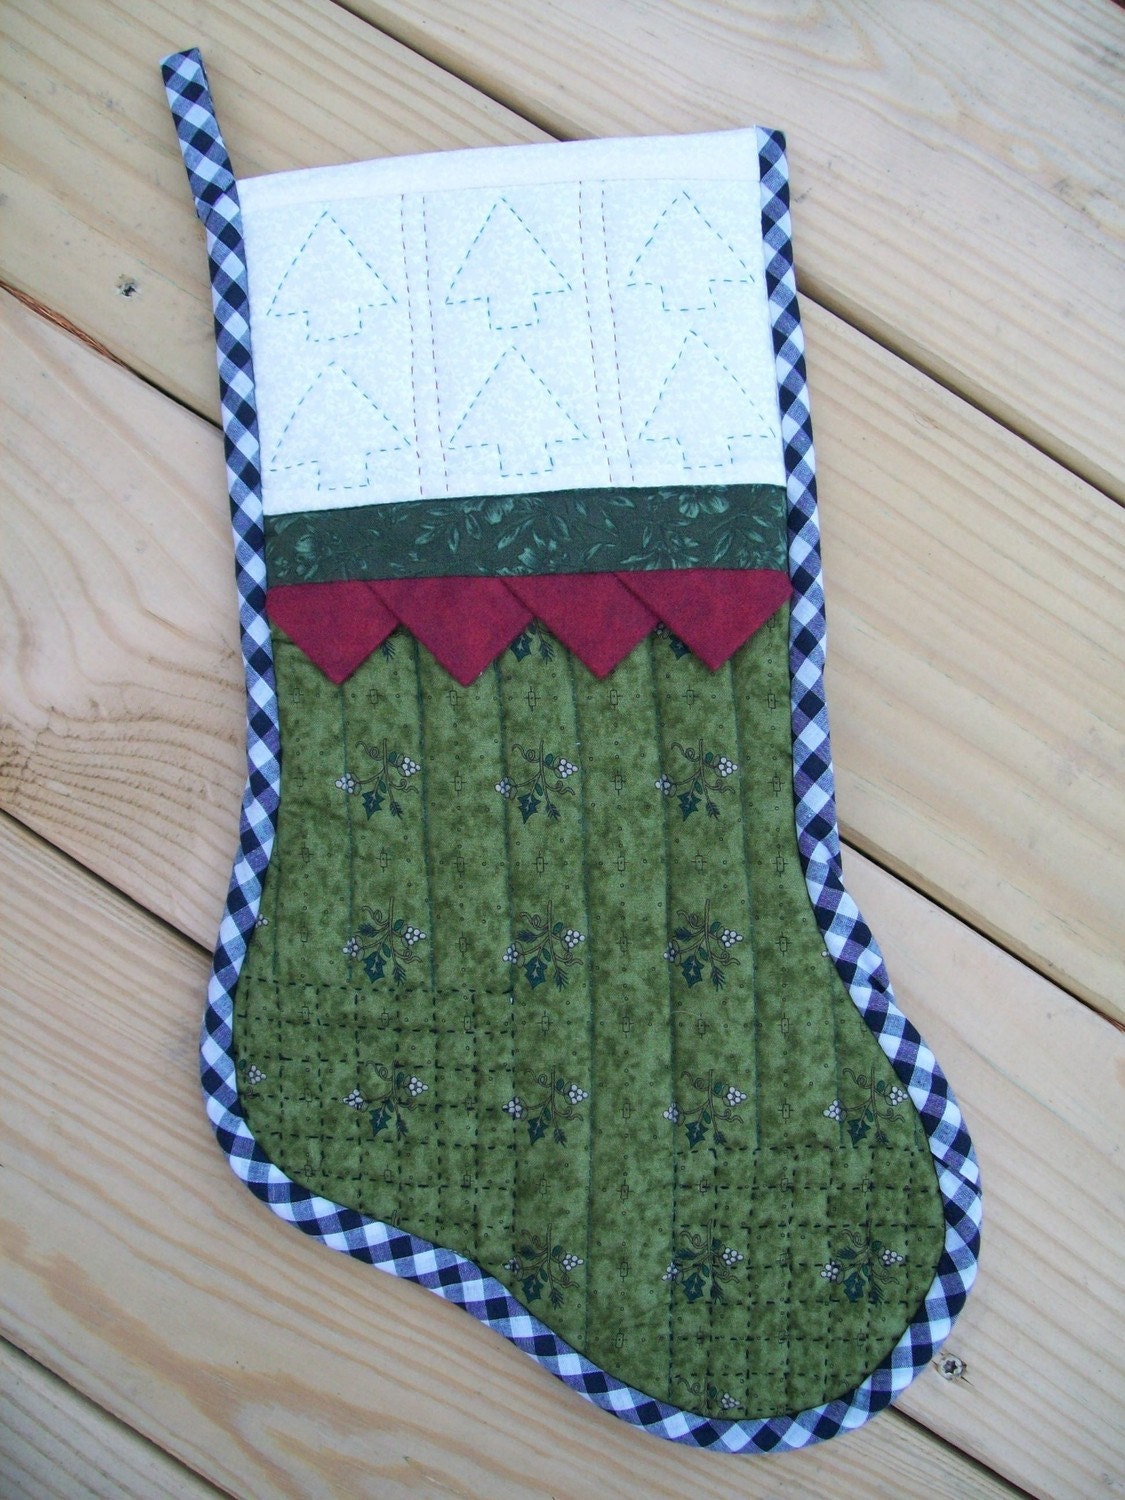 Quilted Christmas Stocking - quiltsbyjessica